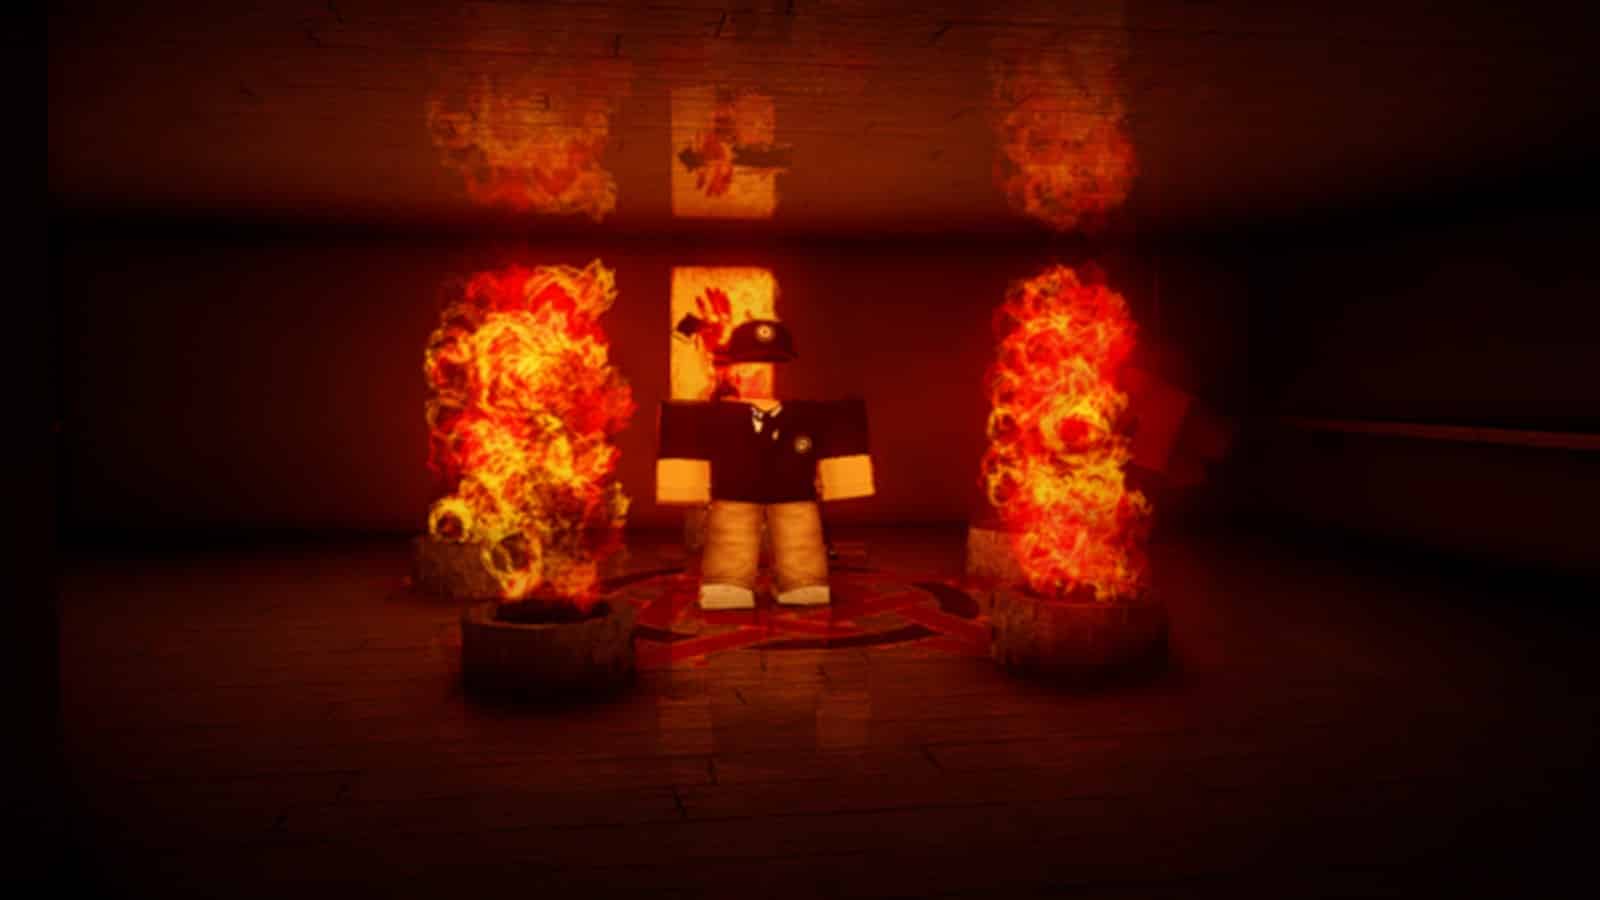 Roblox Halloween Horror Games: Let's Play Horror Games and Make